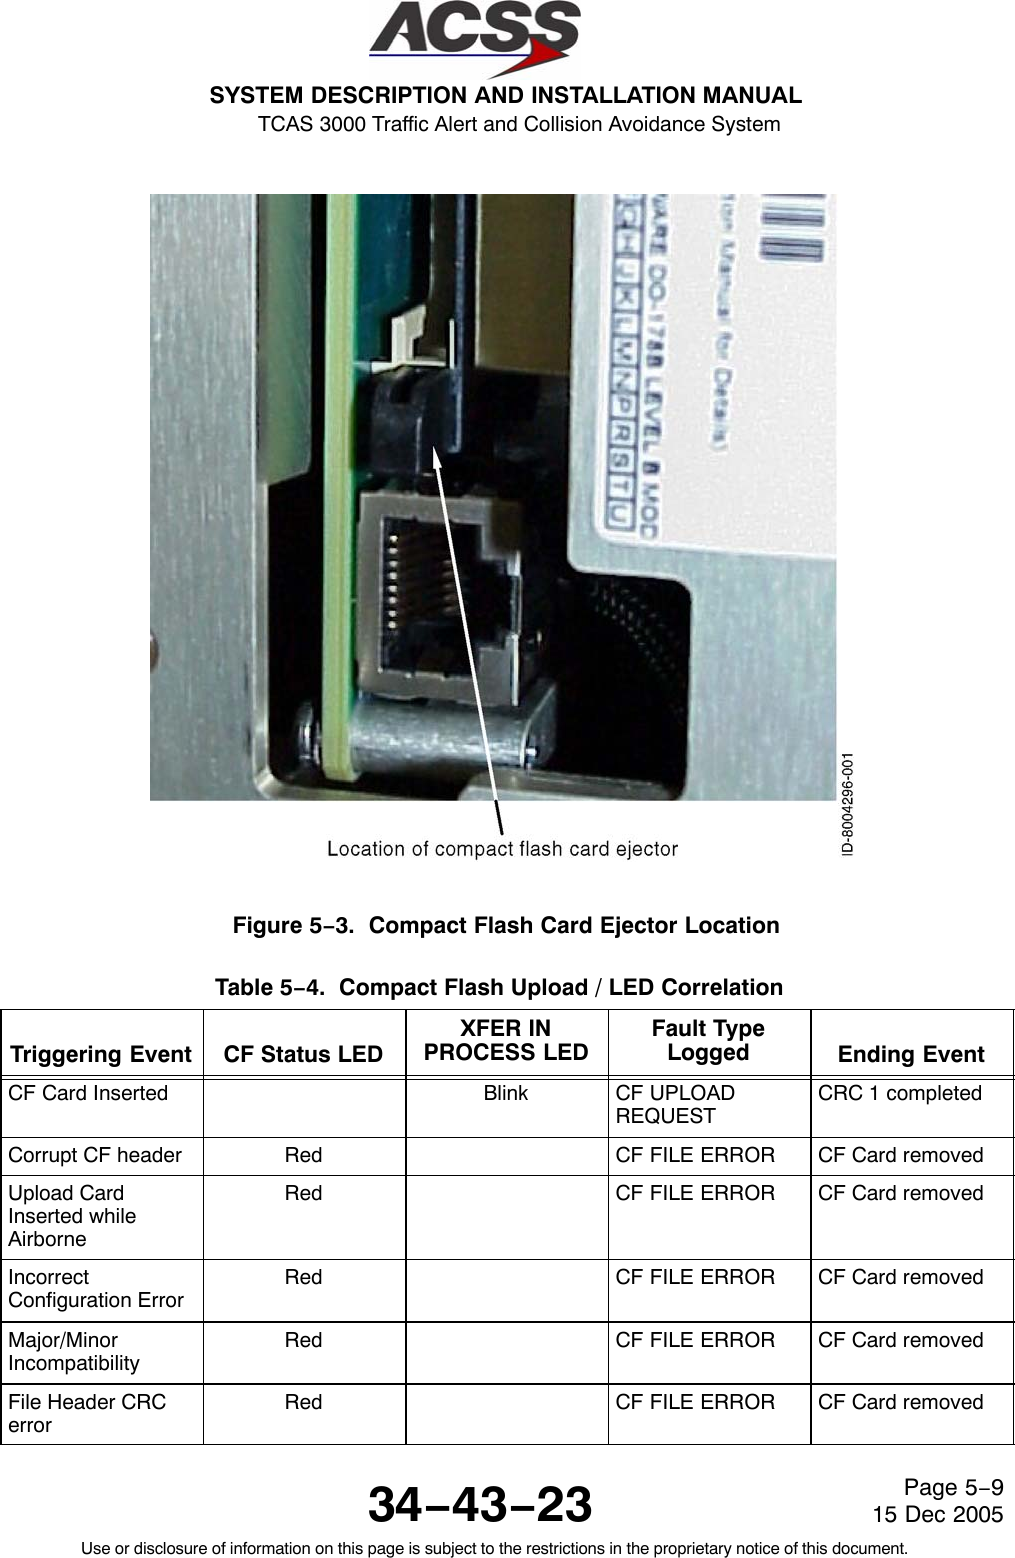 SYSTEM DESCRIPTION AND INSTALLATION MANUAL TCAS 3000 Traffic Alert and Collision Avoidance System34−43−23Use or disclosure of information on this page is subject to the restrictions in the proprietary notice of this document.Page 5−915 Dec 2005Figure 5−3.  Compact Flash Card Ejector LocationTable 5−4.  Compact Flash Upload / LED Correlation  Triggering Event CF Status LEDXFER INPROCESS LEDFault TypeLogged Ending EventCF Card Inserted Blink CF UPLOADREQUESTCRC 1 completedCorrupt CF header Red CF FILE ERROR CF Card removedUpload CardInserted whileAirborneRed CF FILE ERROR CF Card removedIncorrectConfiguration ErrorRed CF FILE ERROR CF Card removedMajor/MinorIncompatibilityRed CF FILE ERROR CF Card removedFile Header CRCerrorRed CF FILE ERROR CF Card removed